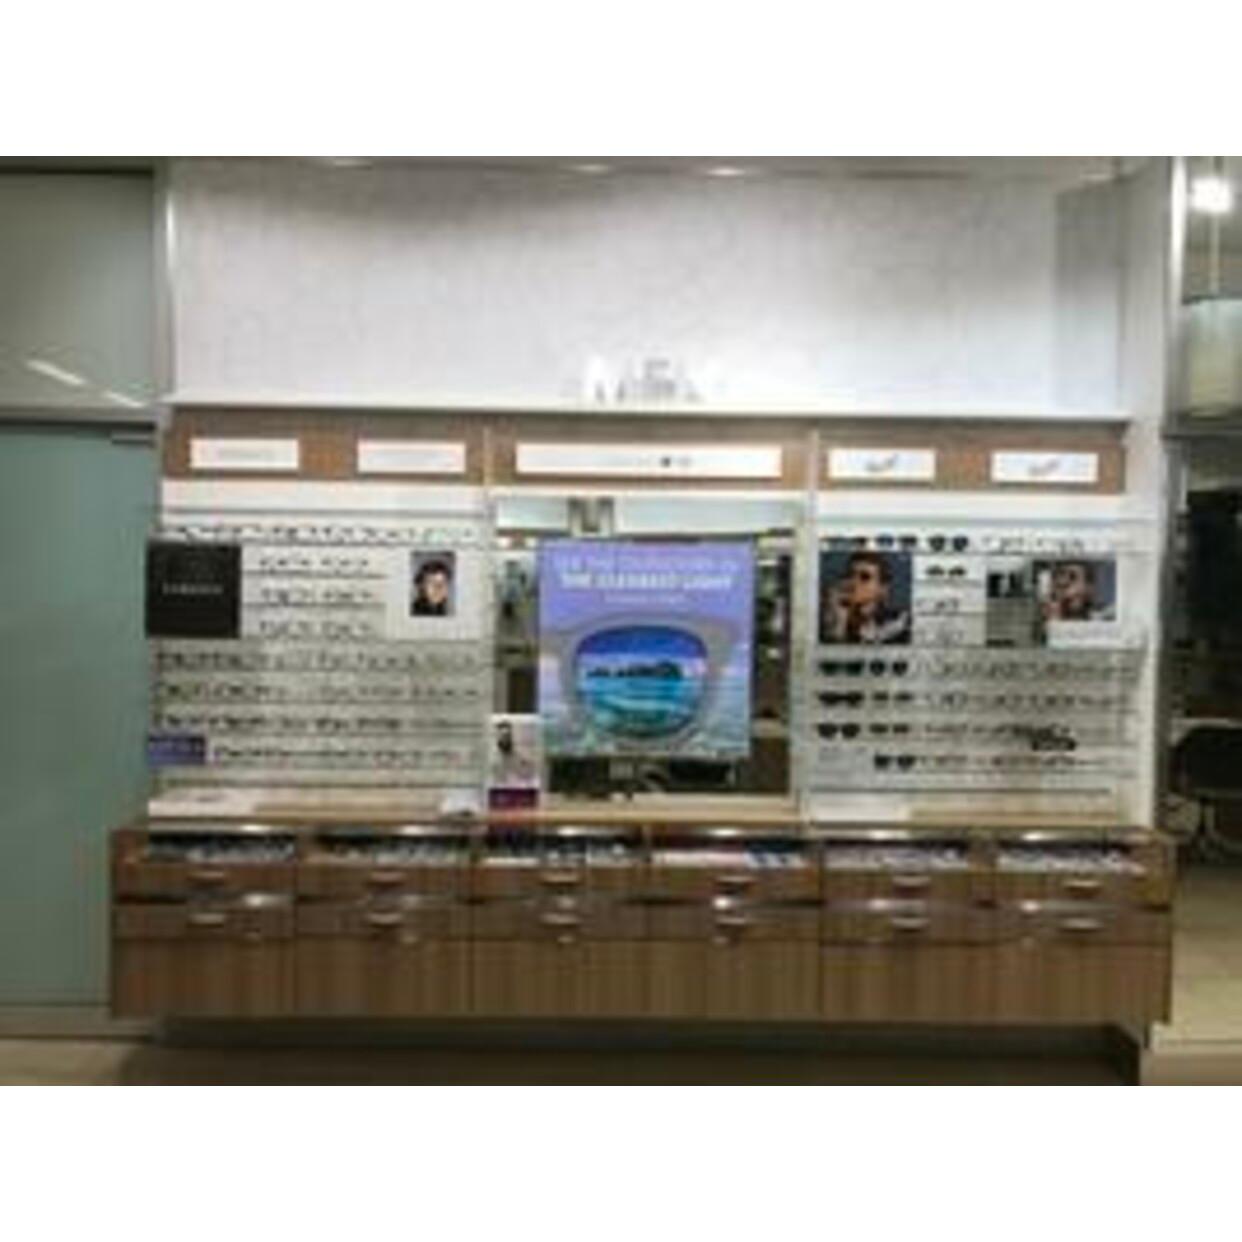 Image 6 | LensCrafters